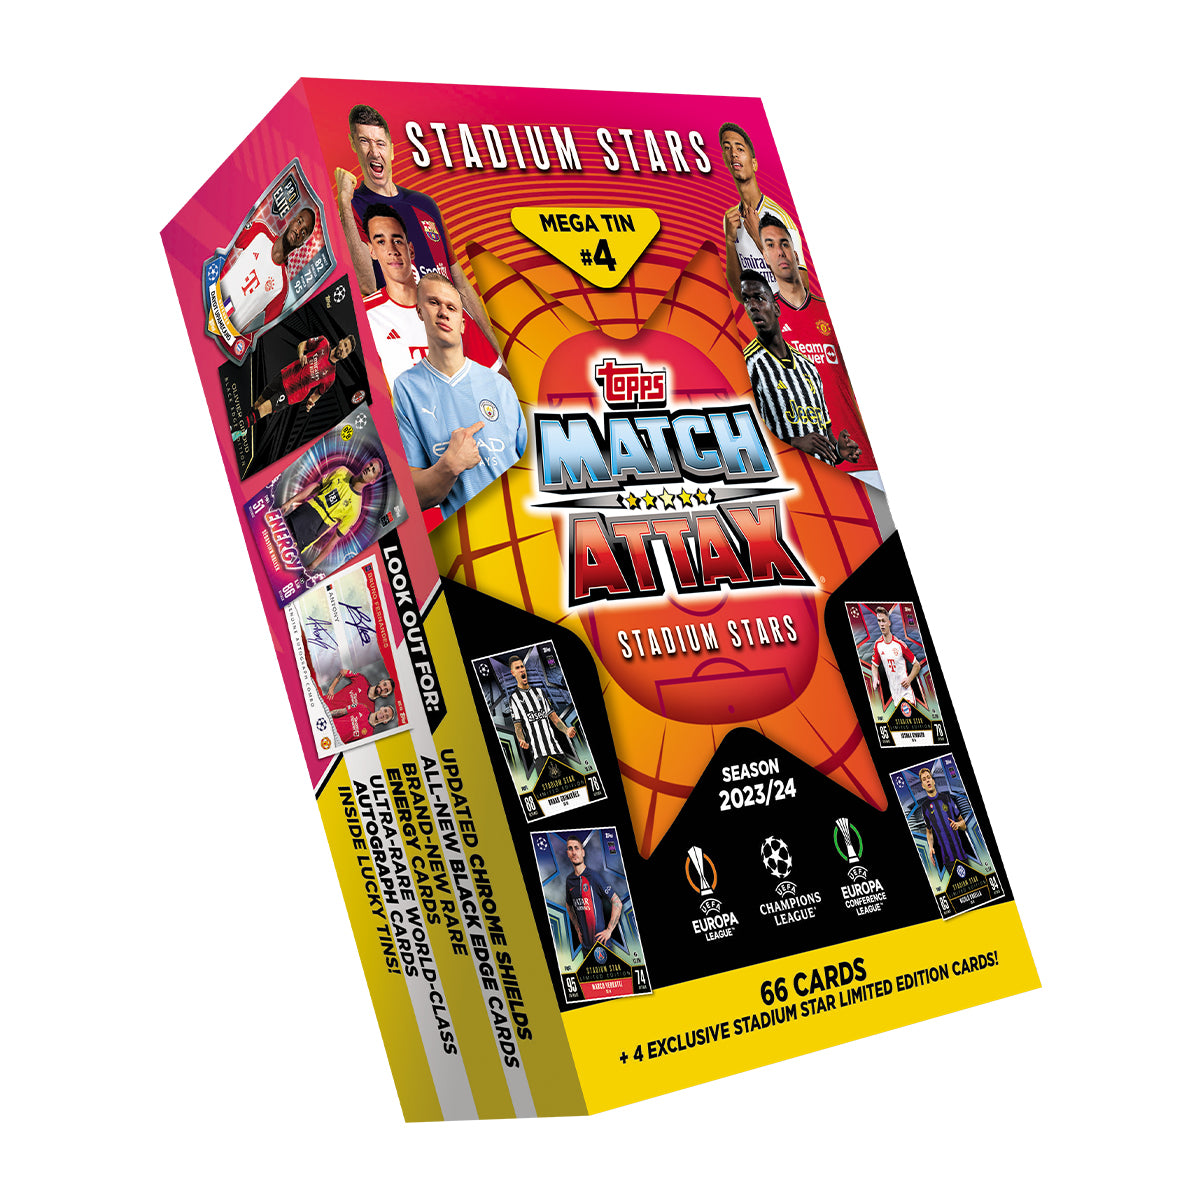 2023-24 TOPPS MATCH ATTAX UEFA CHAMPIONS LEAGUE CARDS - STADIUM STARS MEGA TIN (66 CARDS + 4 LE) (IN STOCK OCT 21)